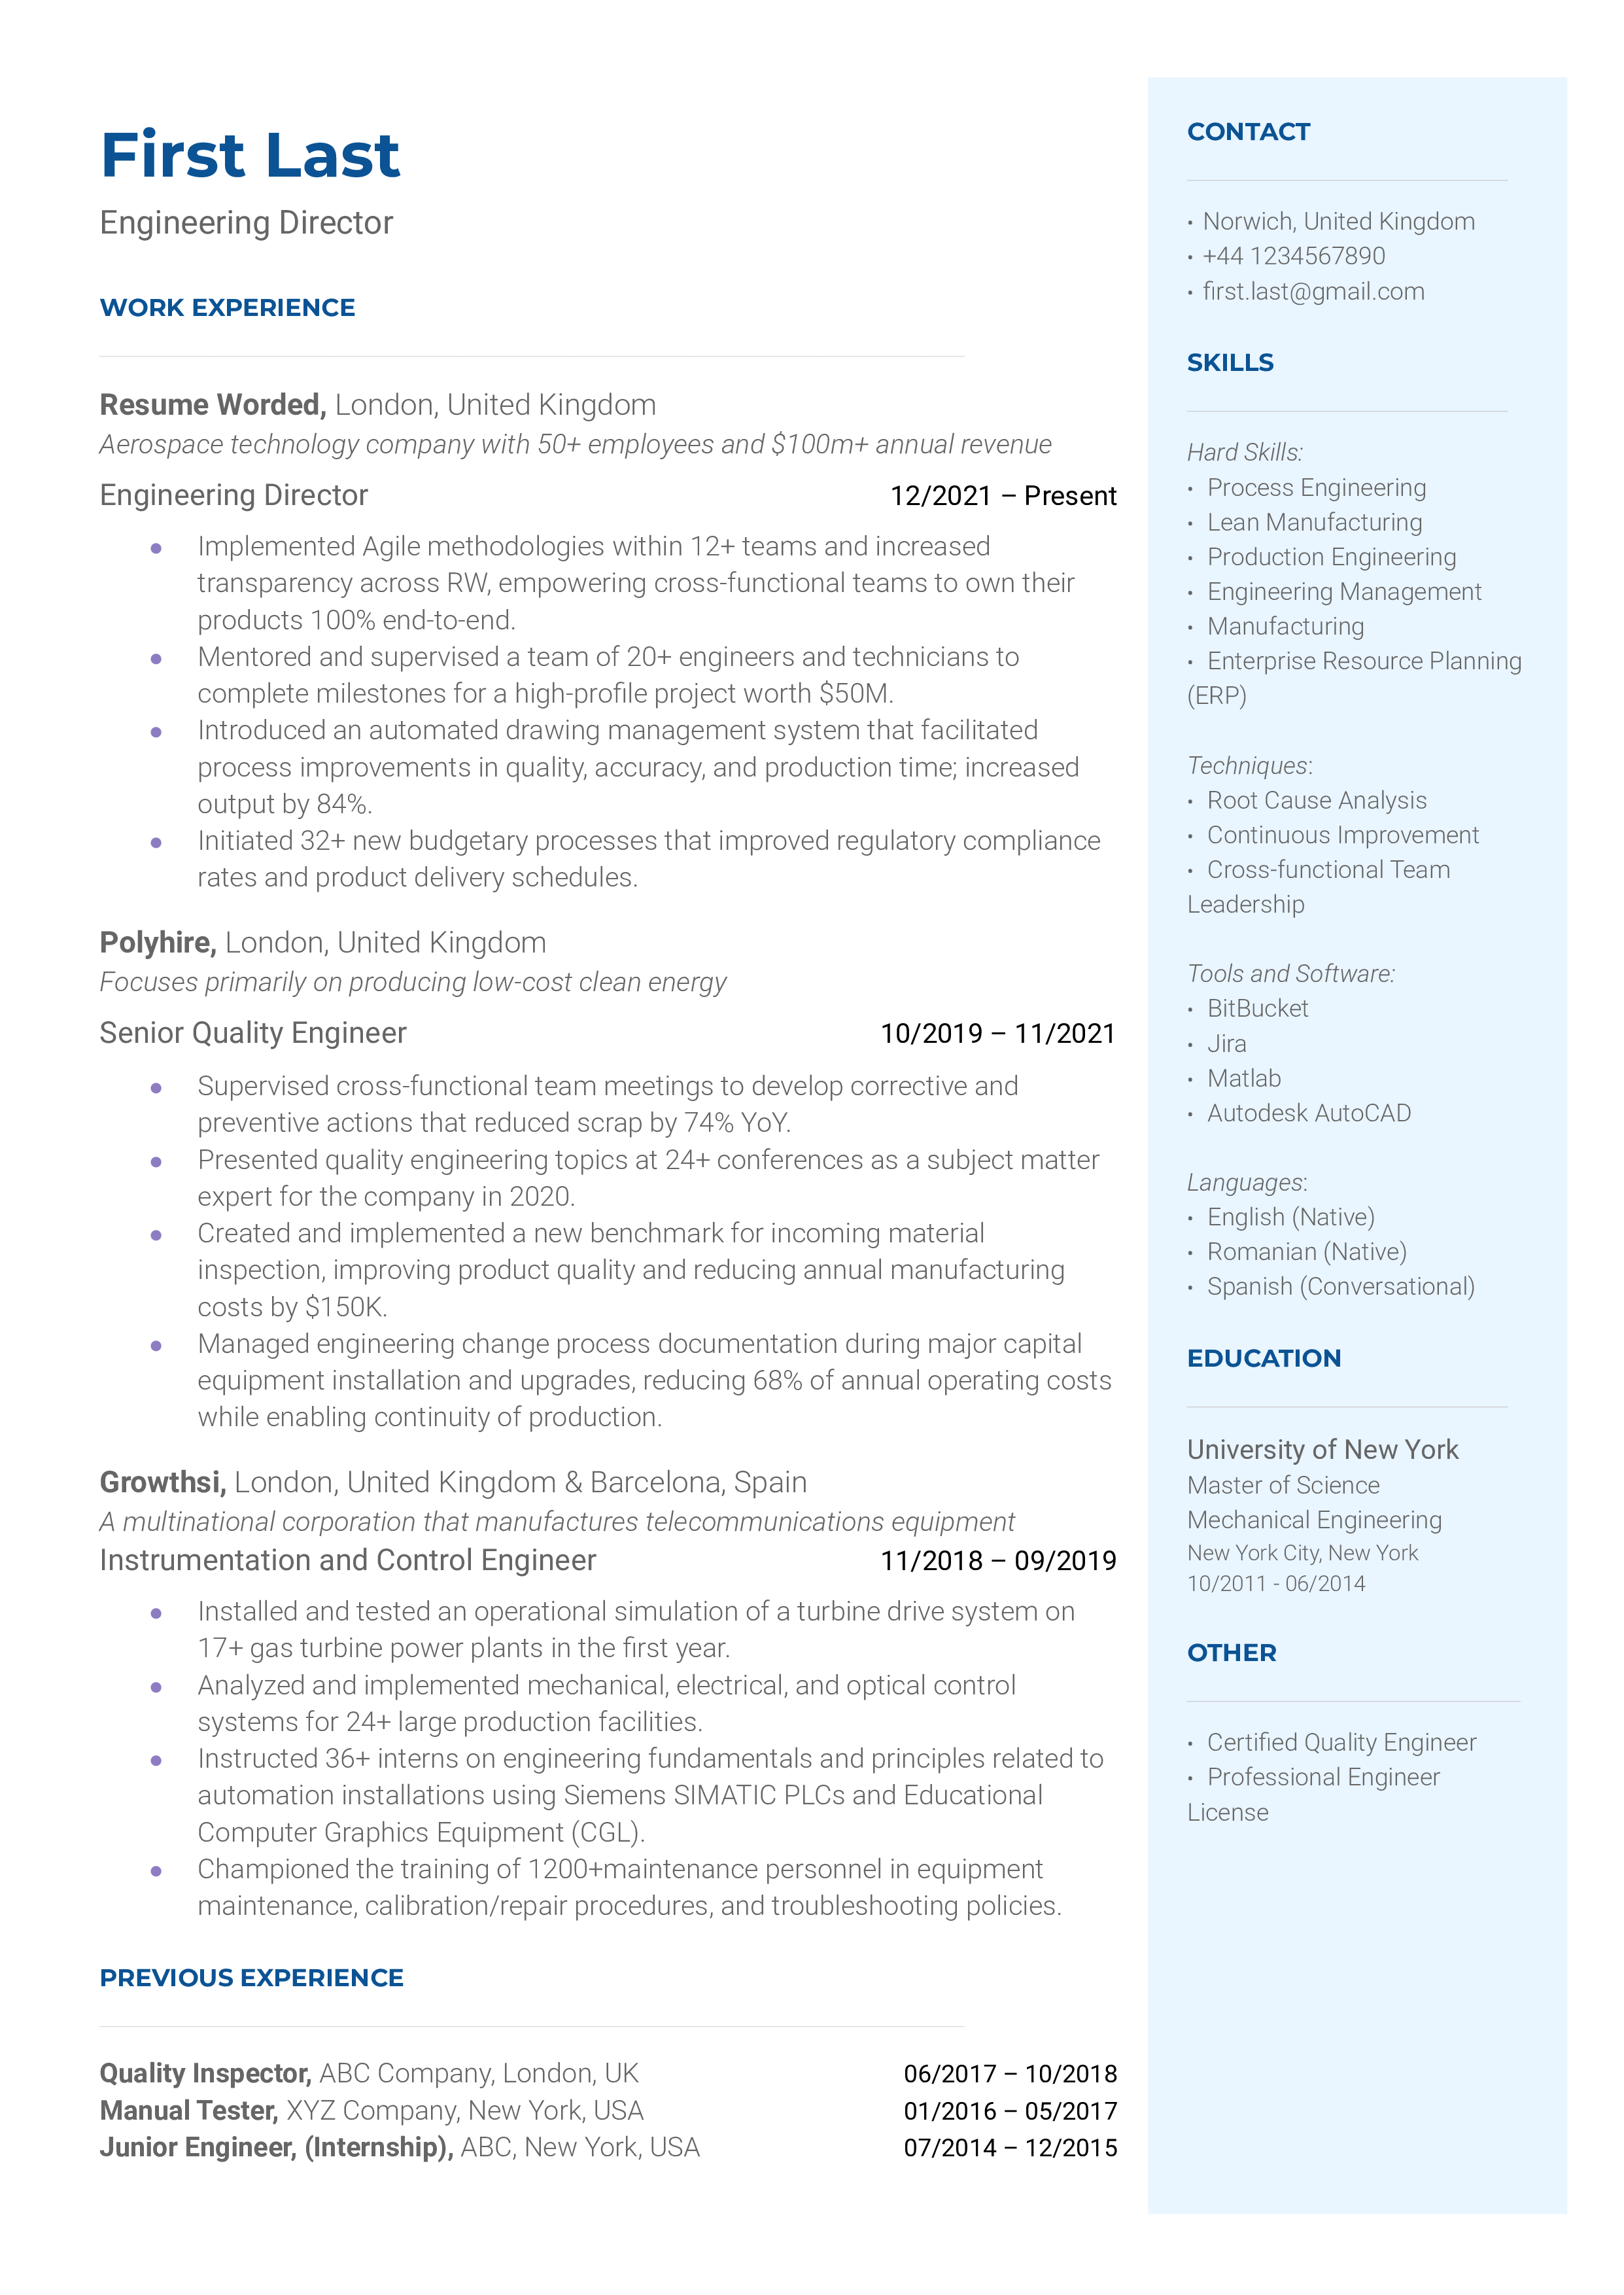 A engineering director resume template that prioritizes technical skills.